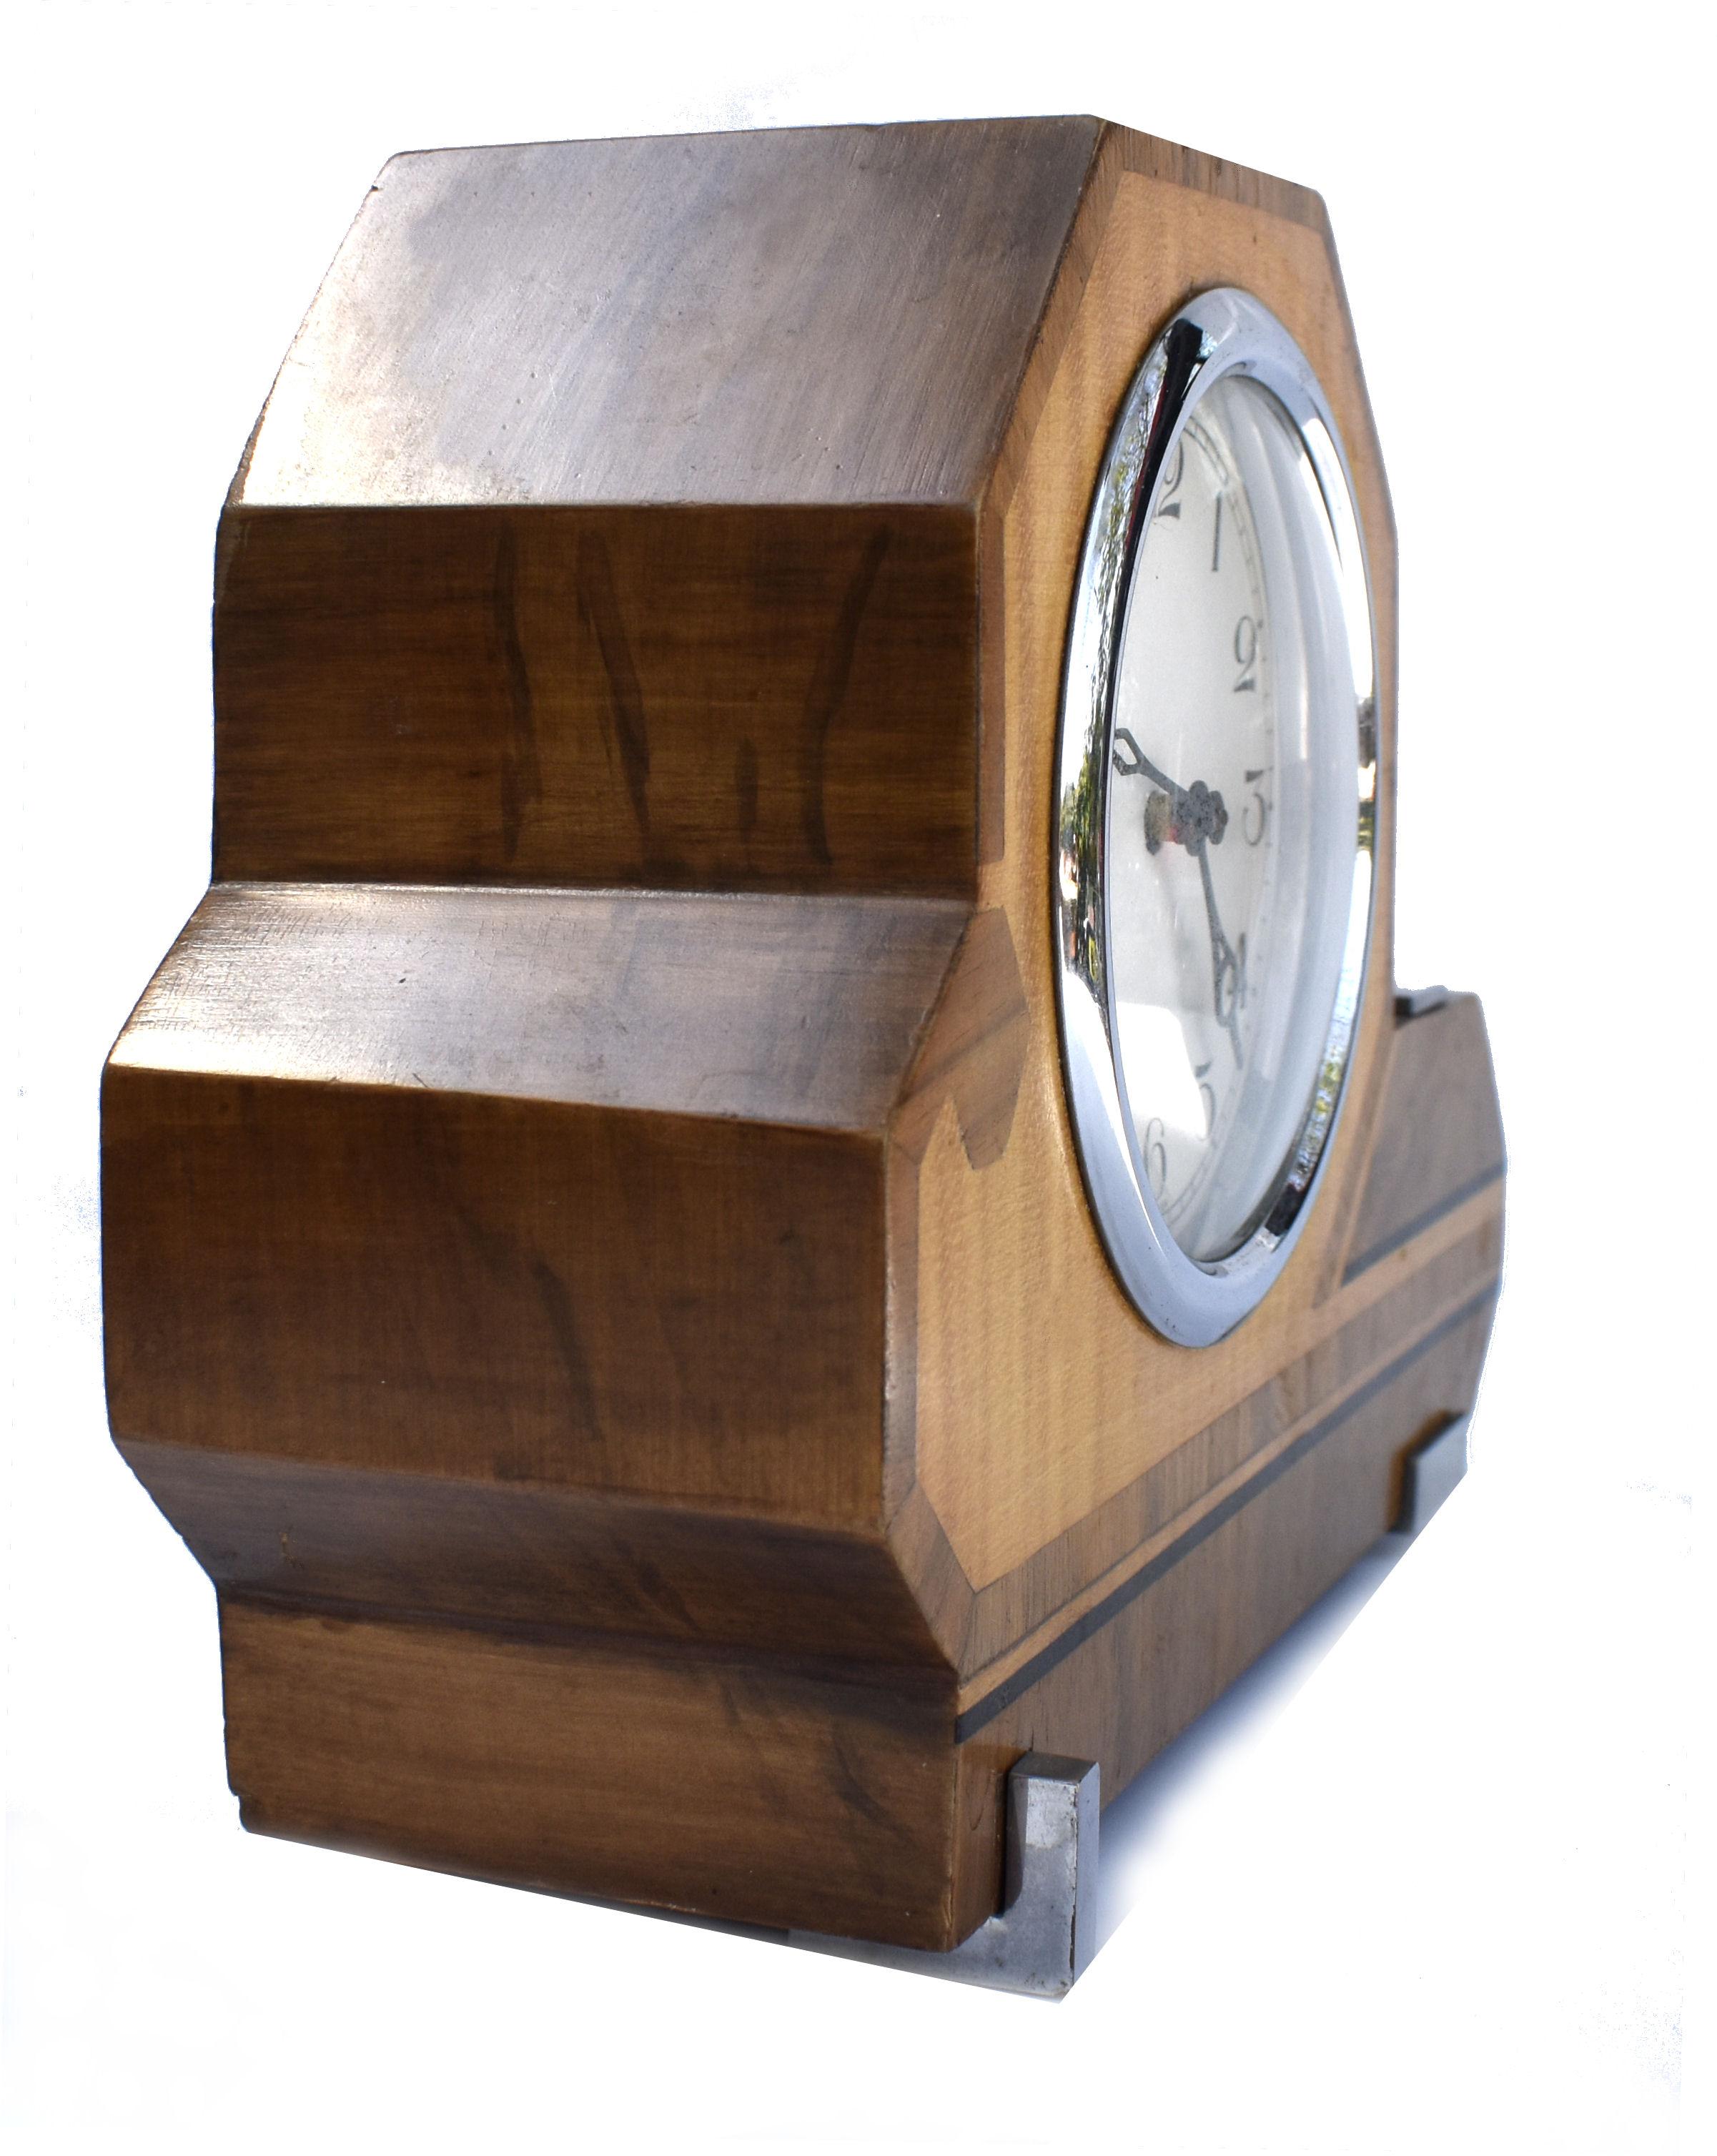 Art Deco Geometric Two Tone Wooden Mantle Clock, English, c1930 In Good Condition For Sale In Devon, England